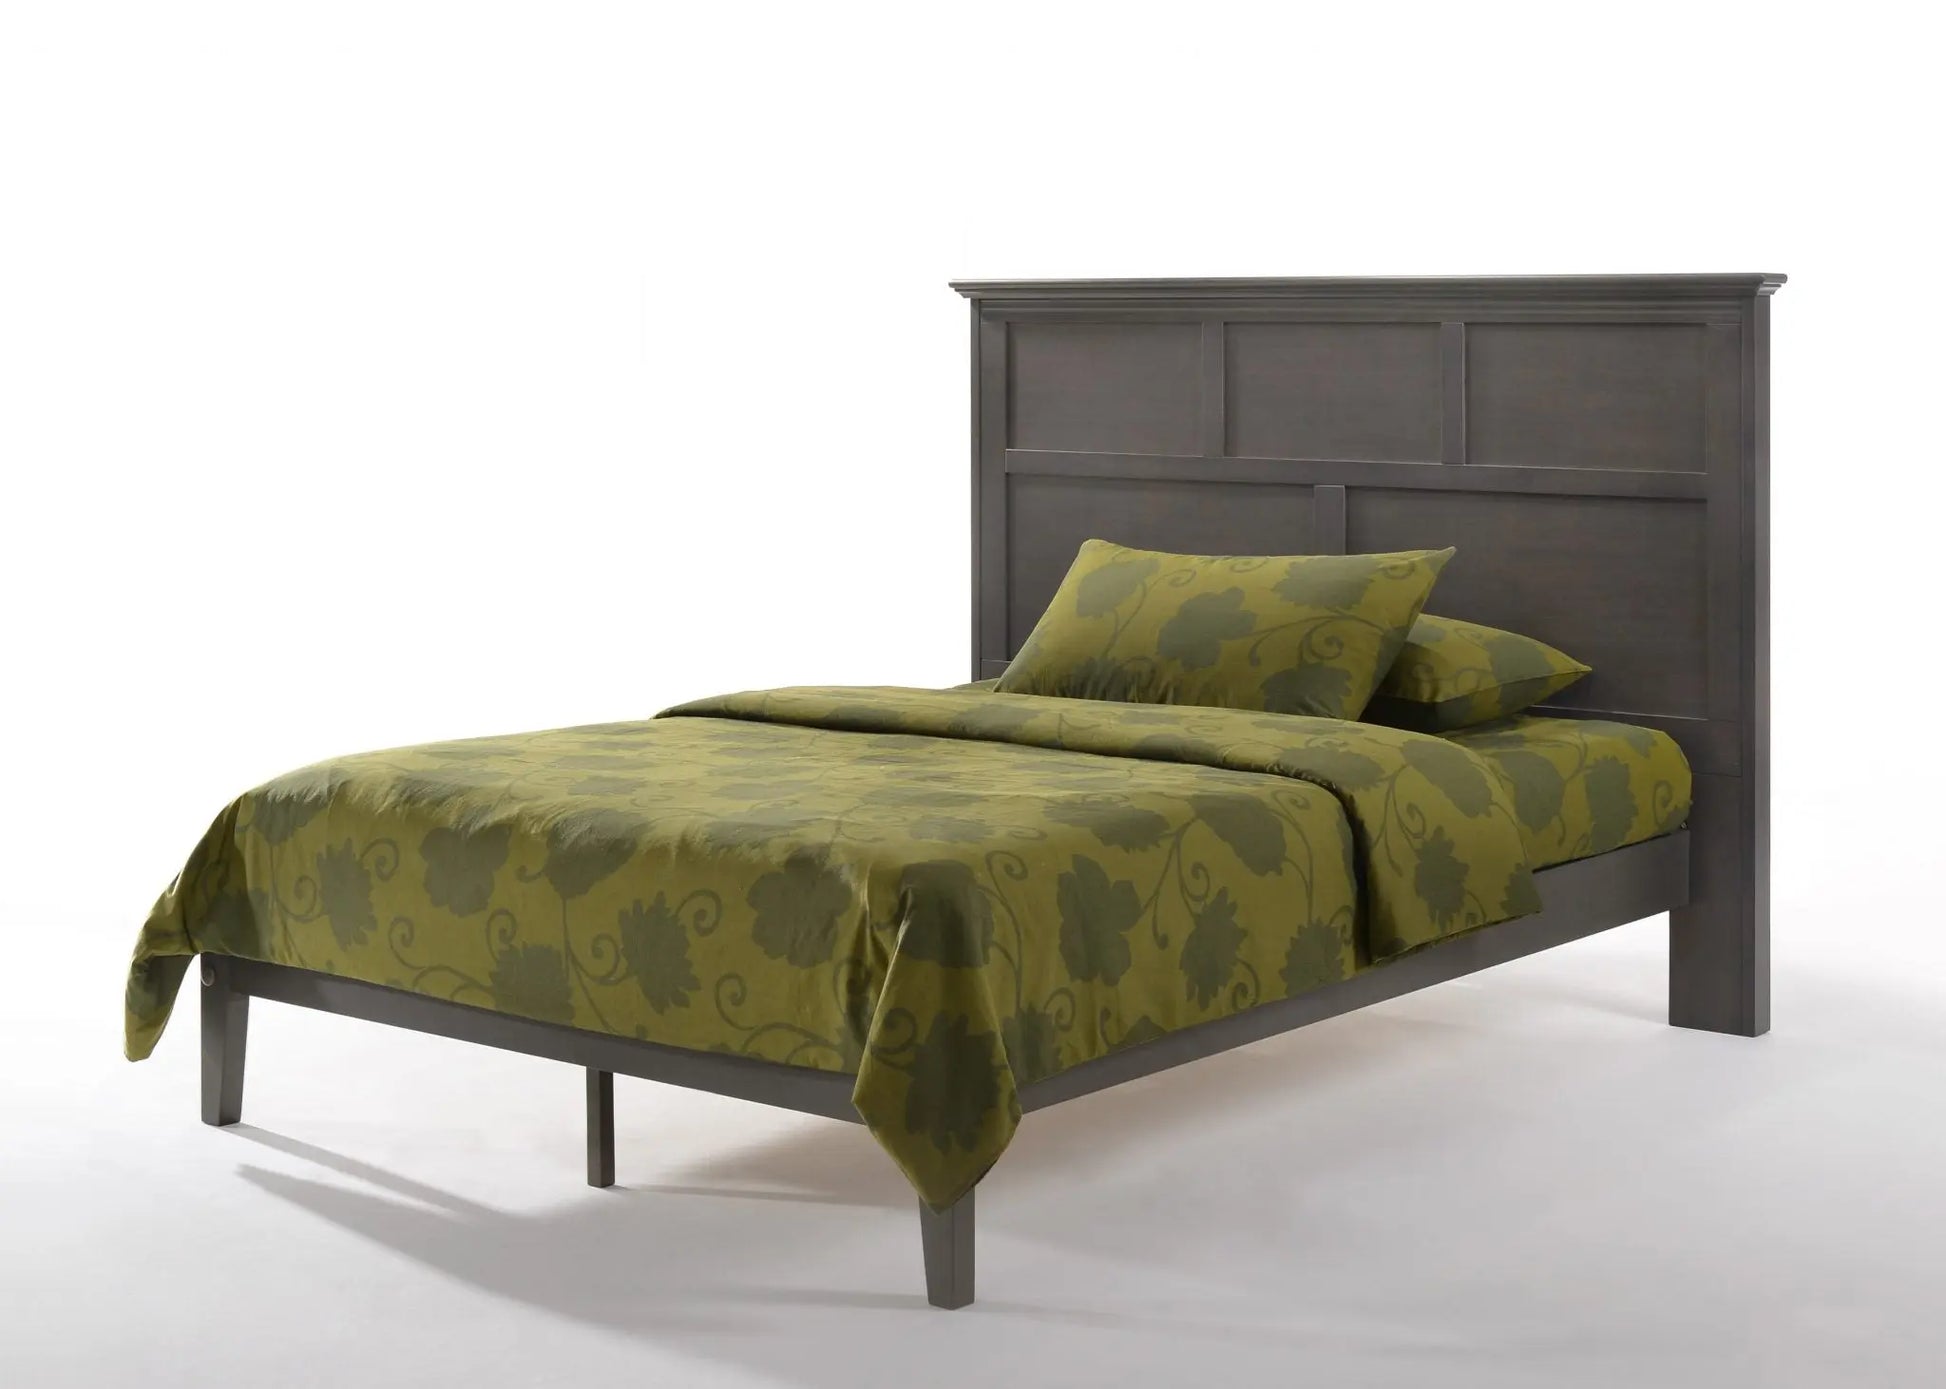 TARRAGON BED night and day furniture